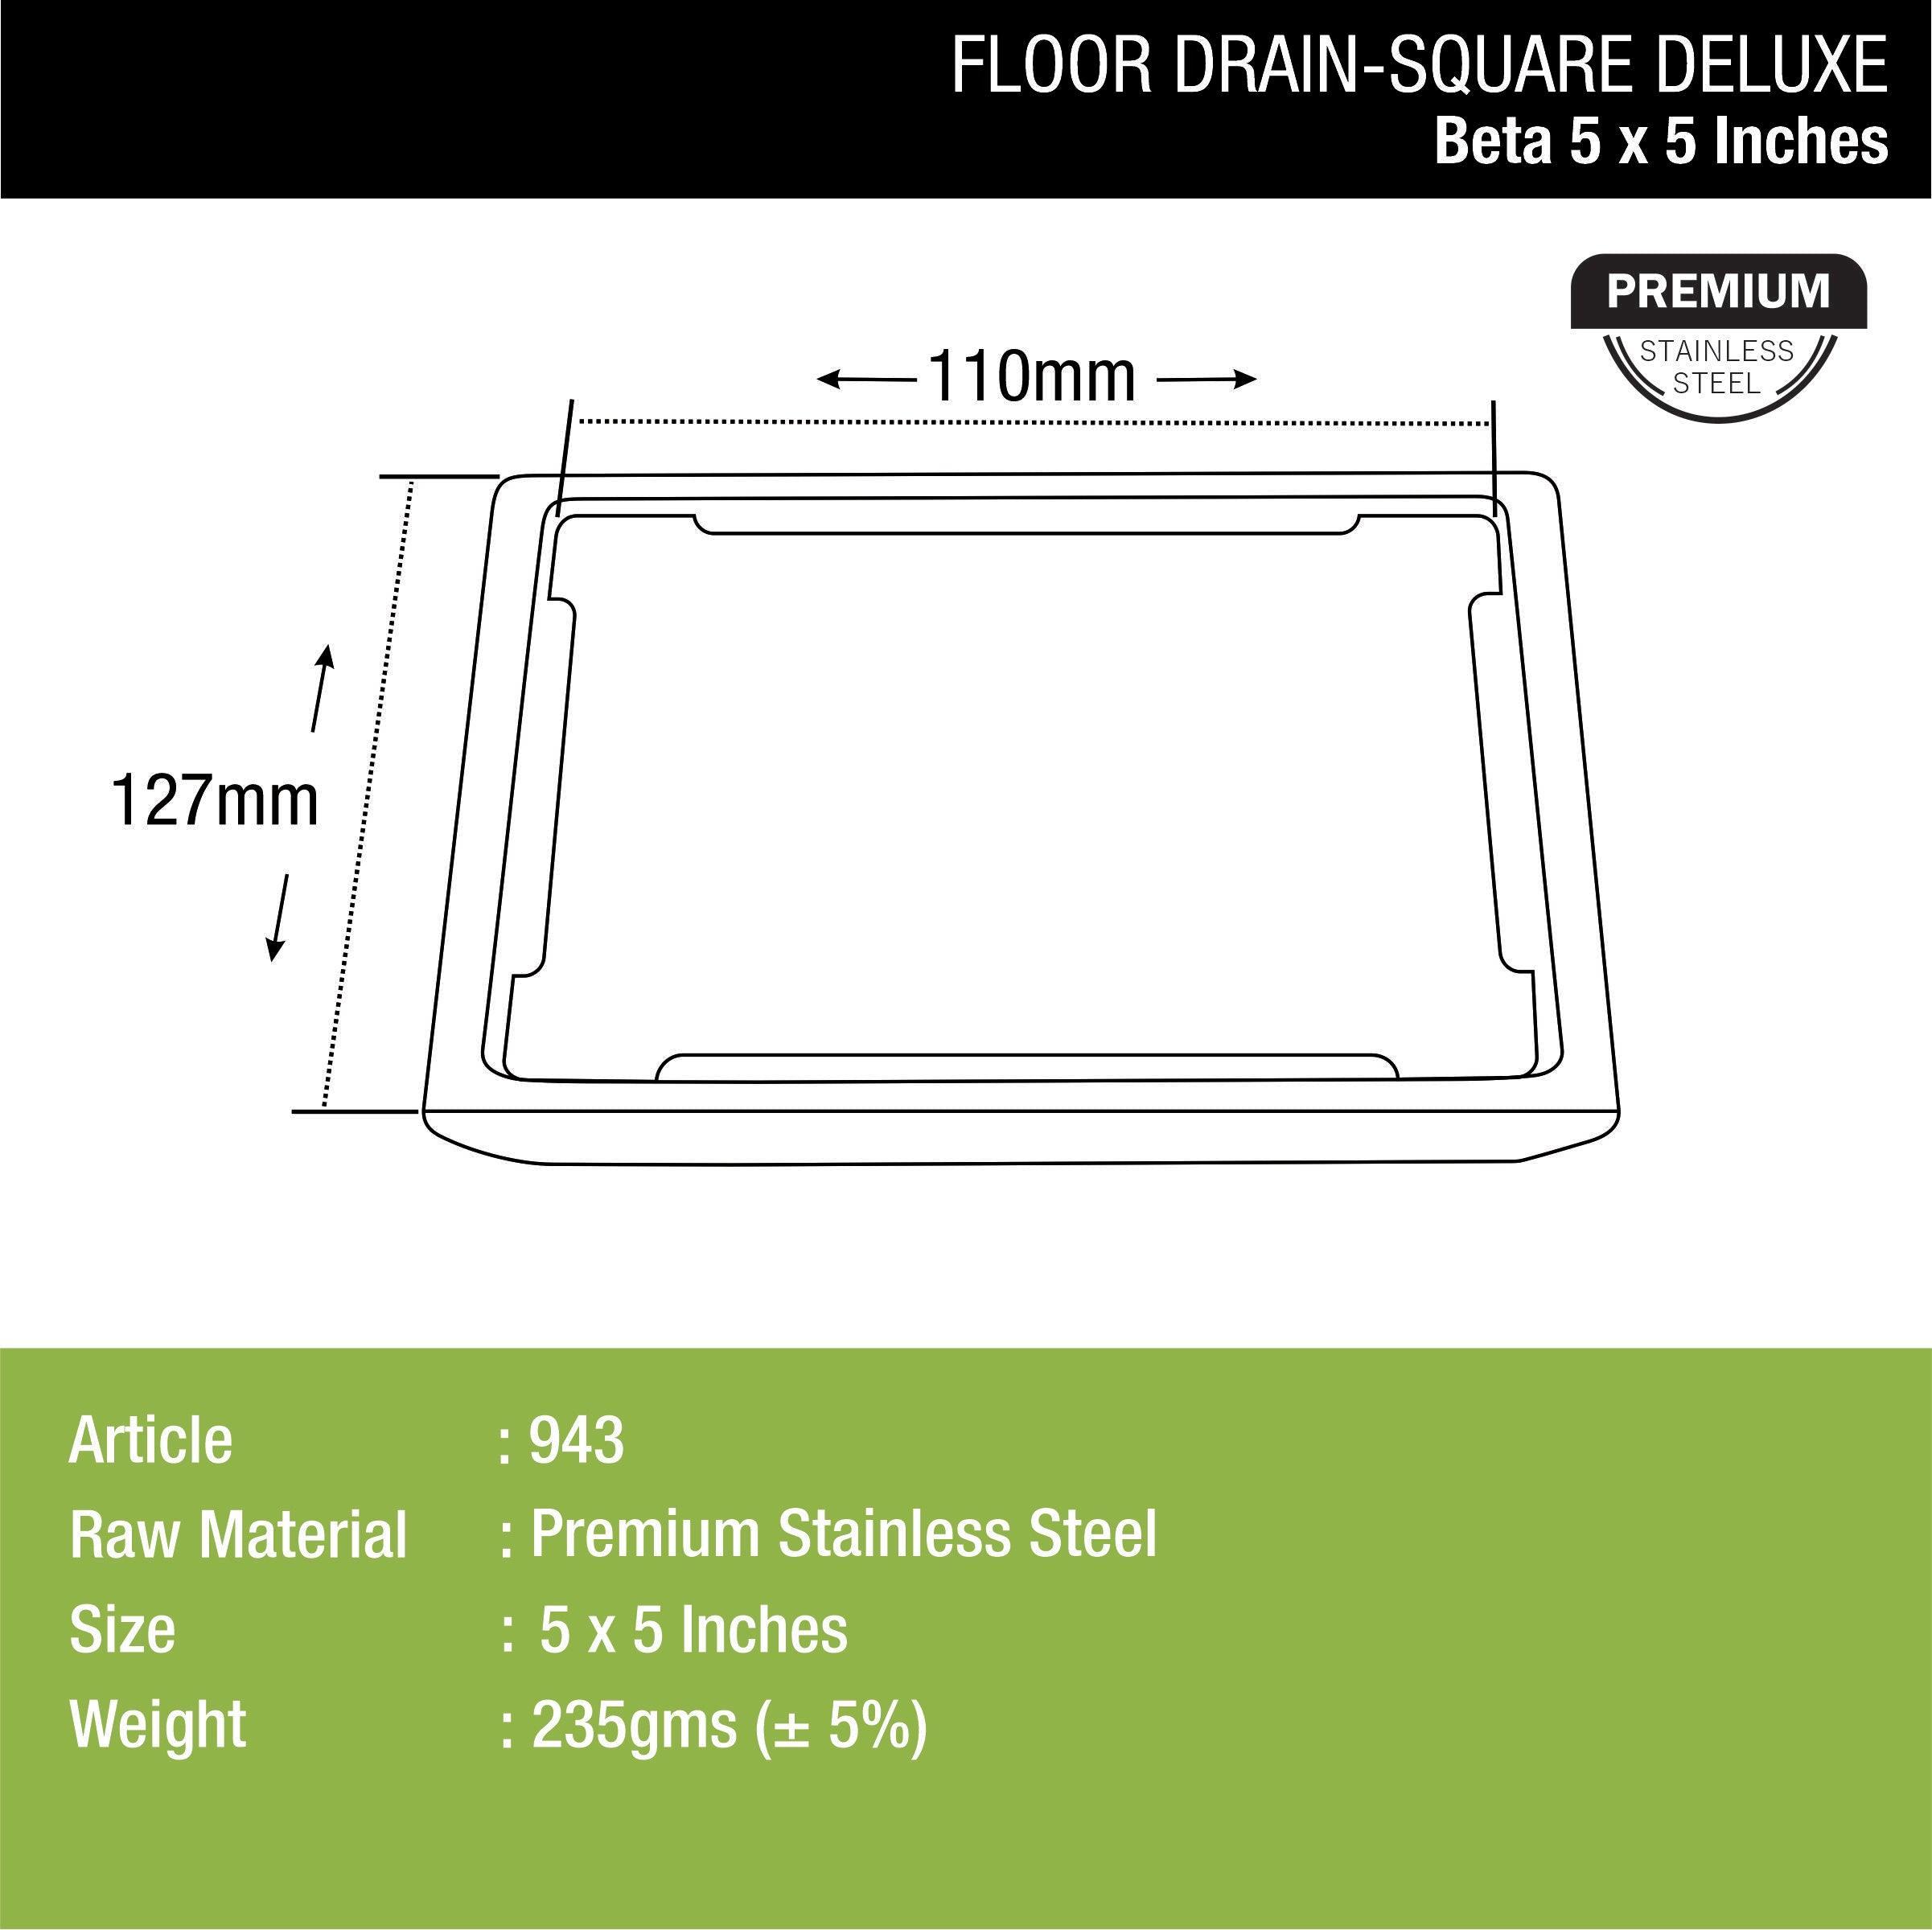 Beta Deluxe Square Floor Drain (5 x 5 Inches) dimensions and sizes